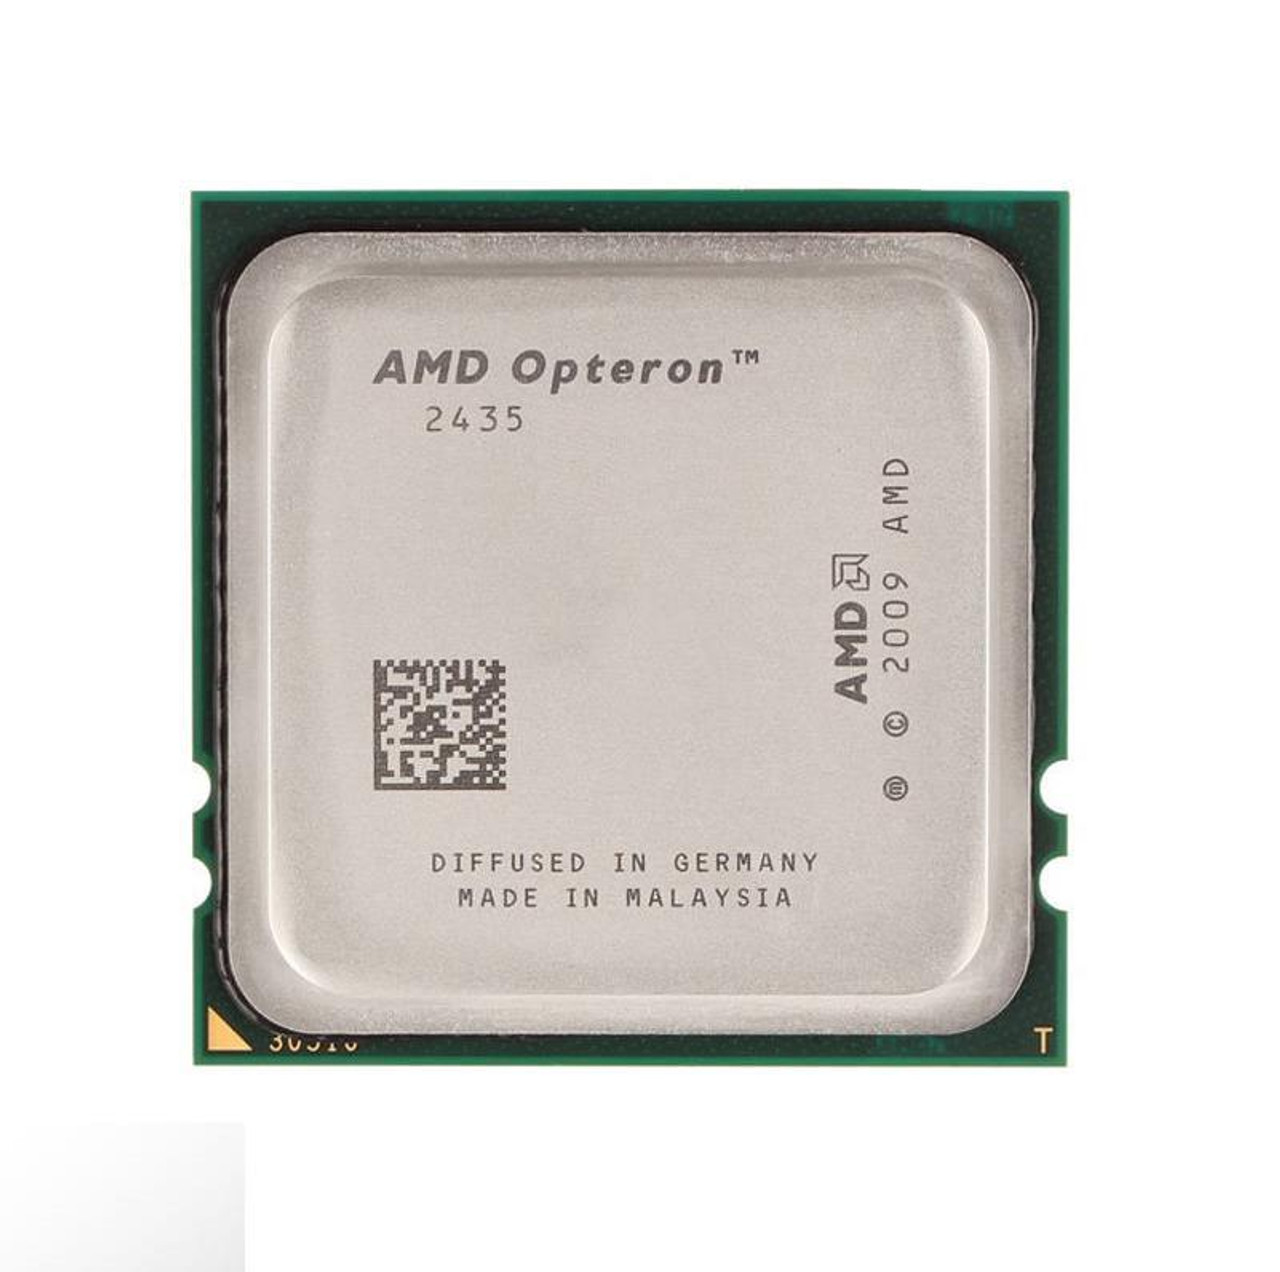 Dell 2.60GHz 6MB L3 Cache Socket Fr6 AMD Opteron 2435 6-Core Processor Upgrade